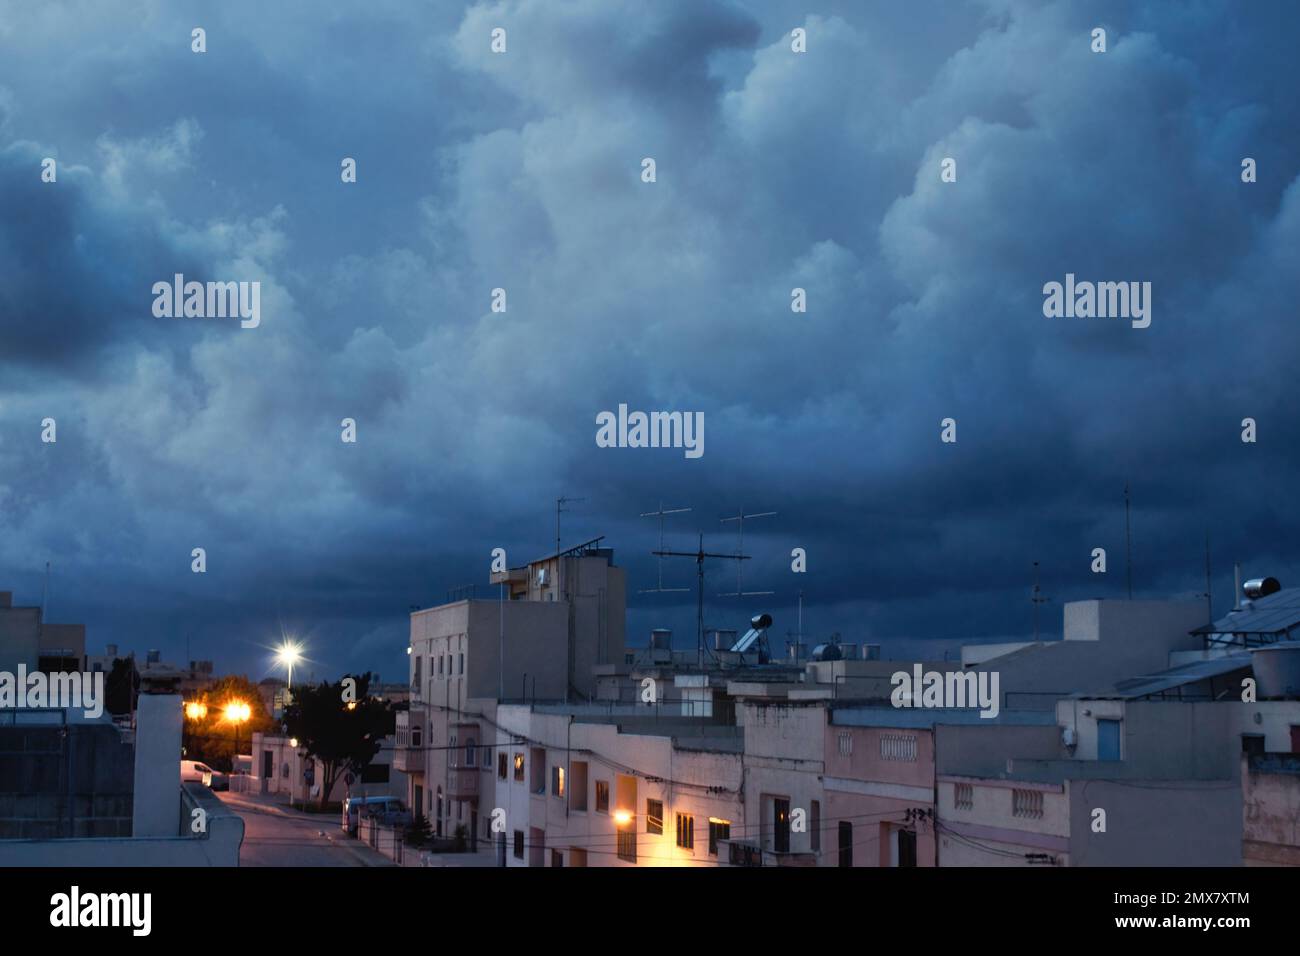 A dark blue overcast sky above a residential street with rows of houses Stock Photo